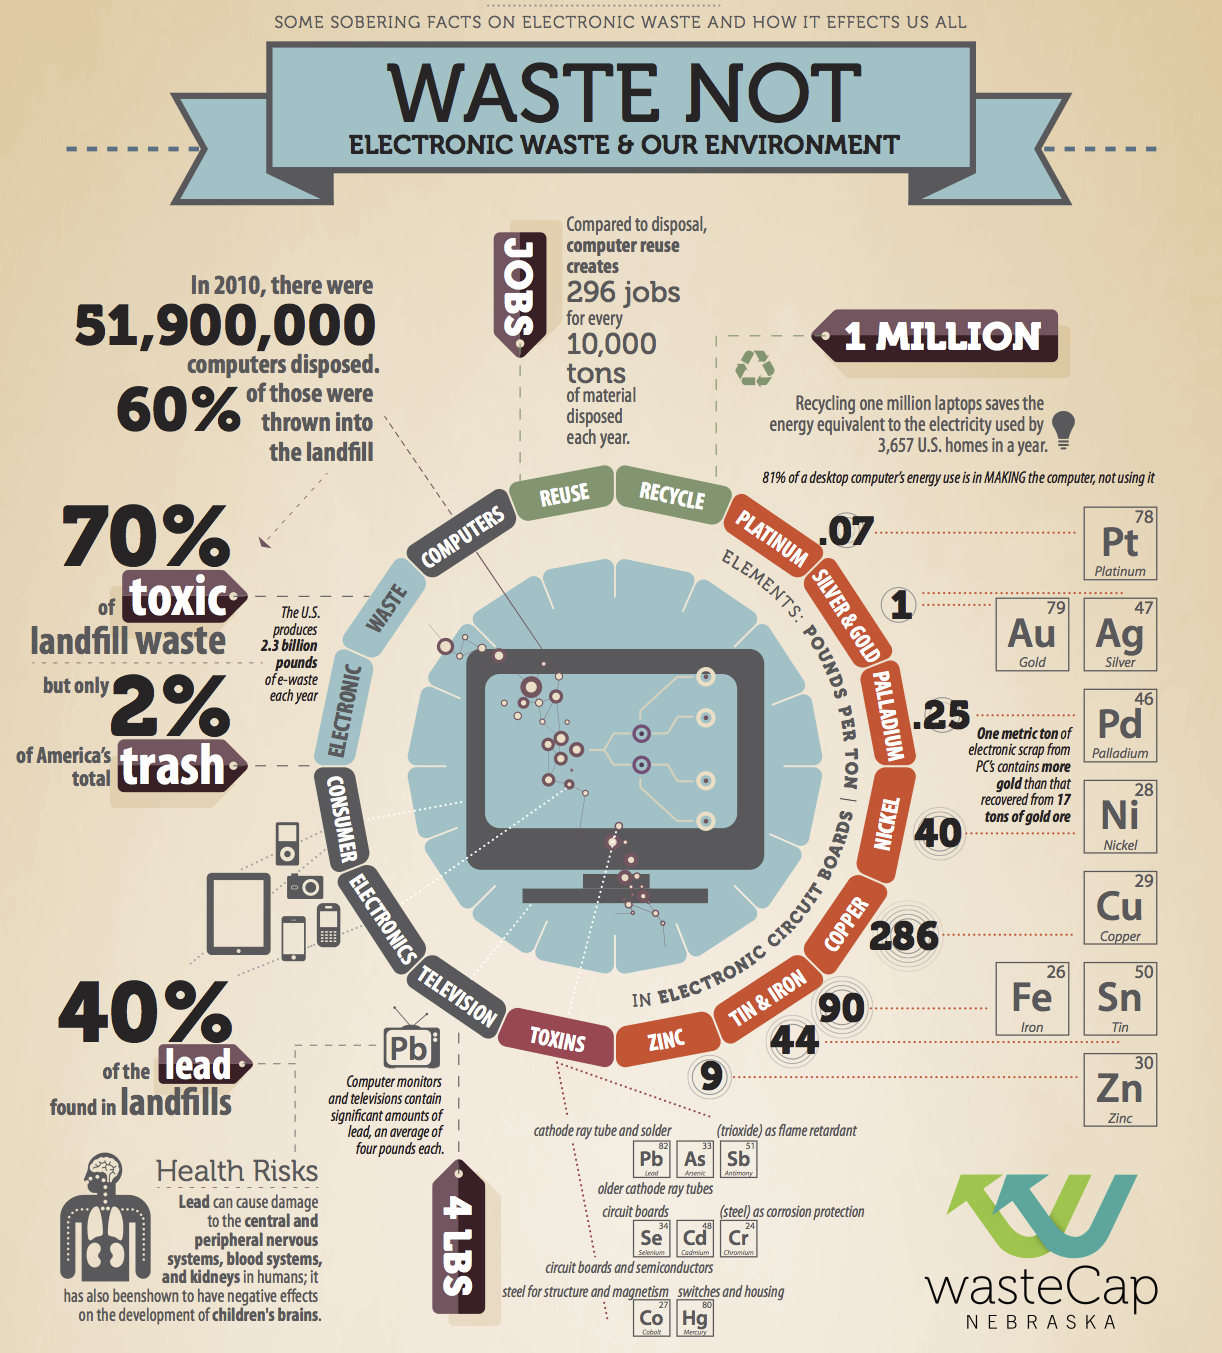 Why Recycle e-waste